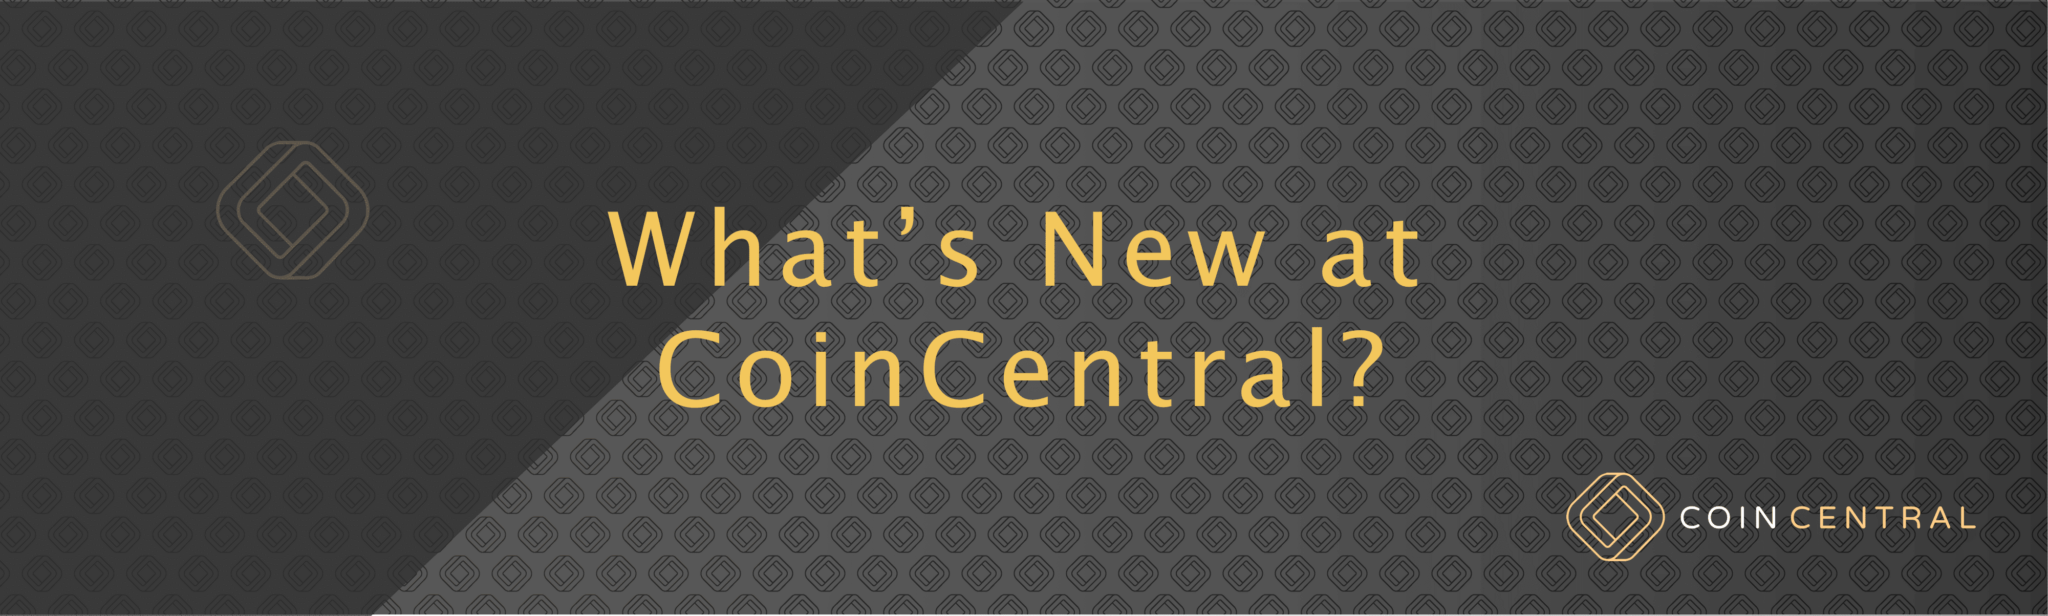 whats new at coincentral